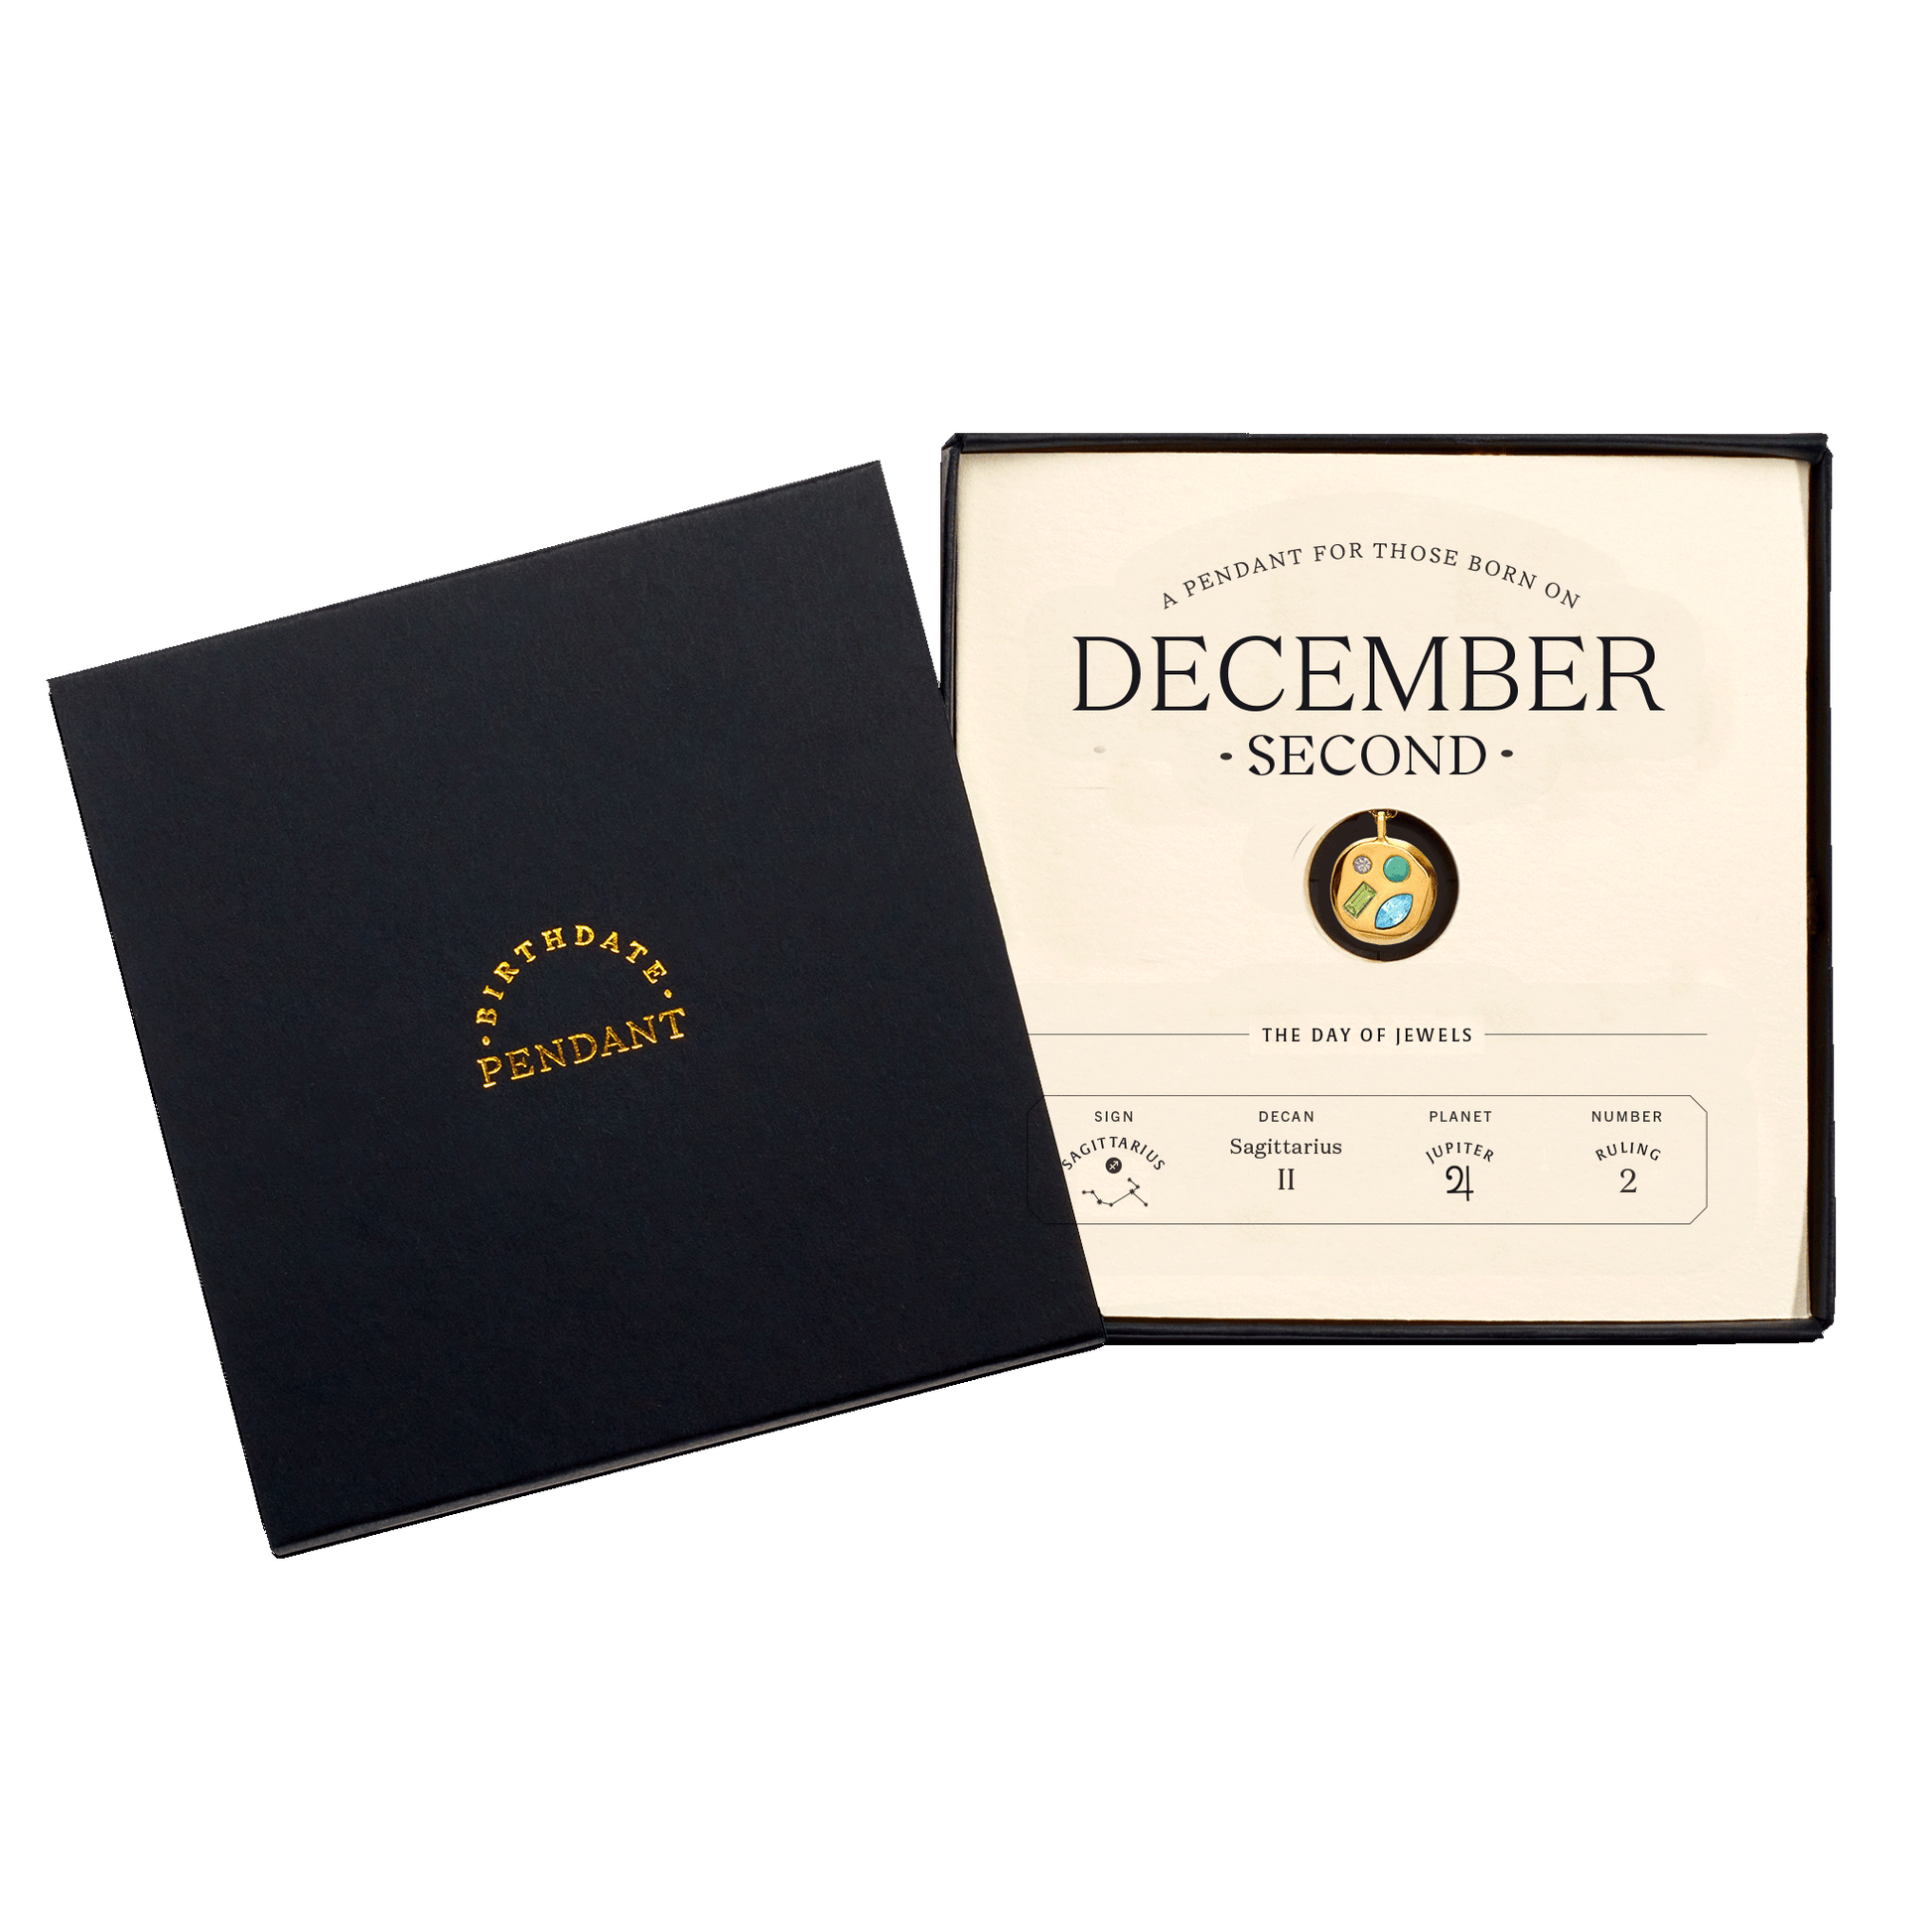 The December Second Pendant inside its box